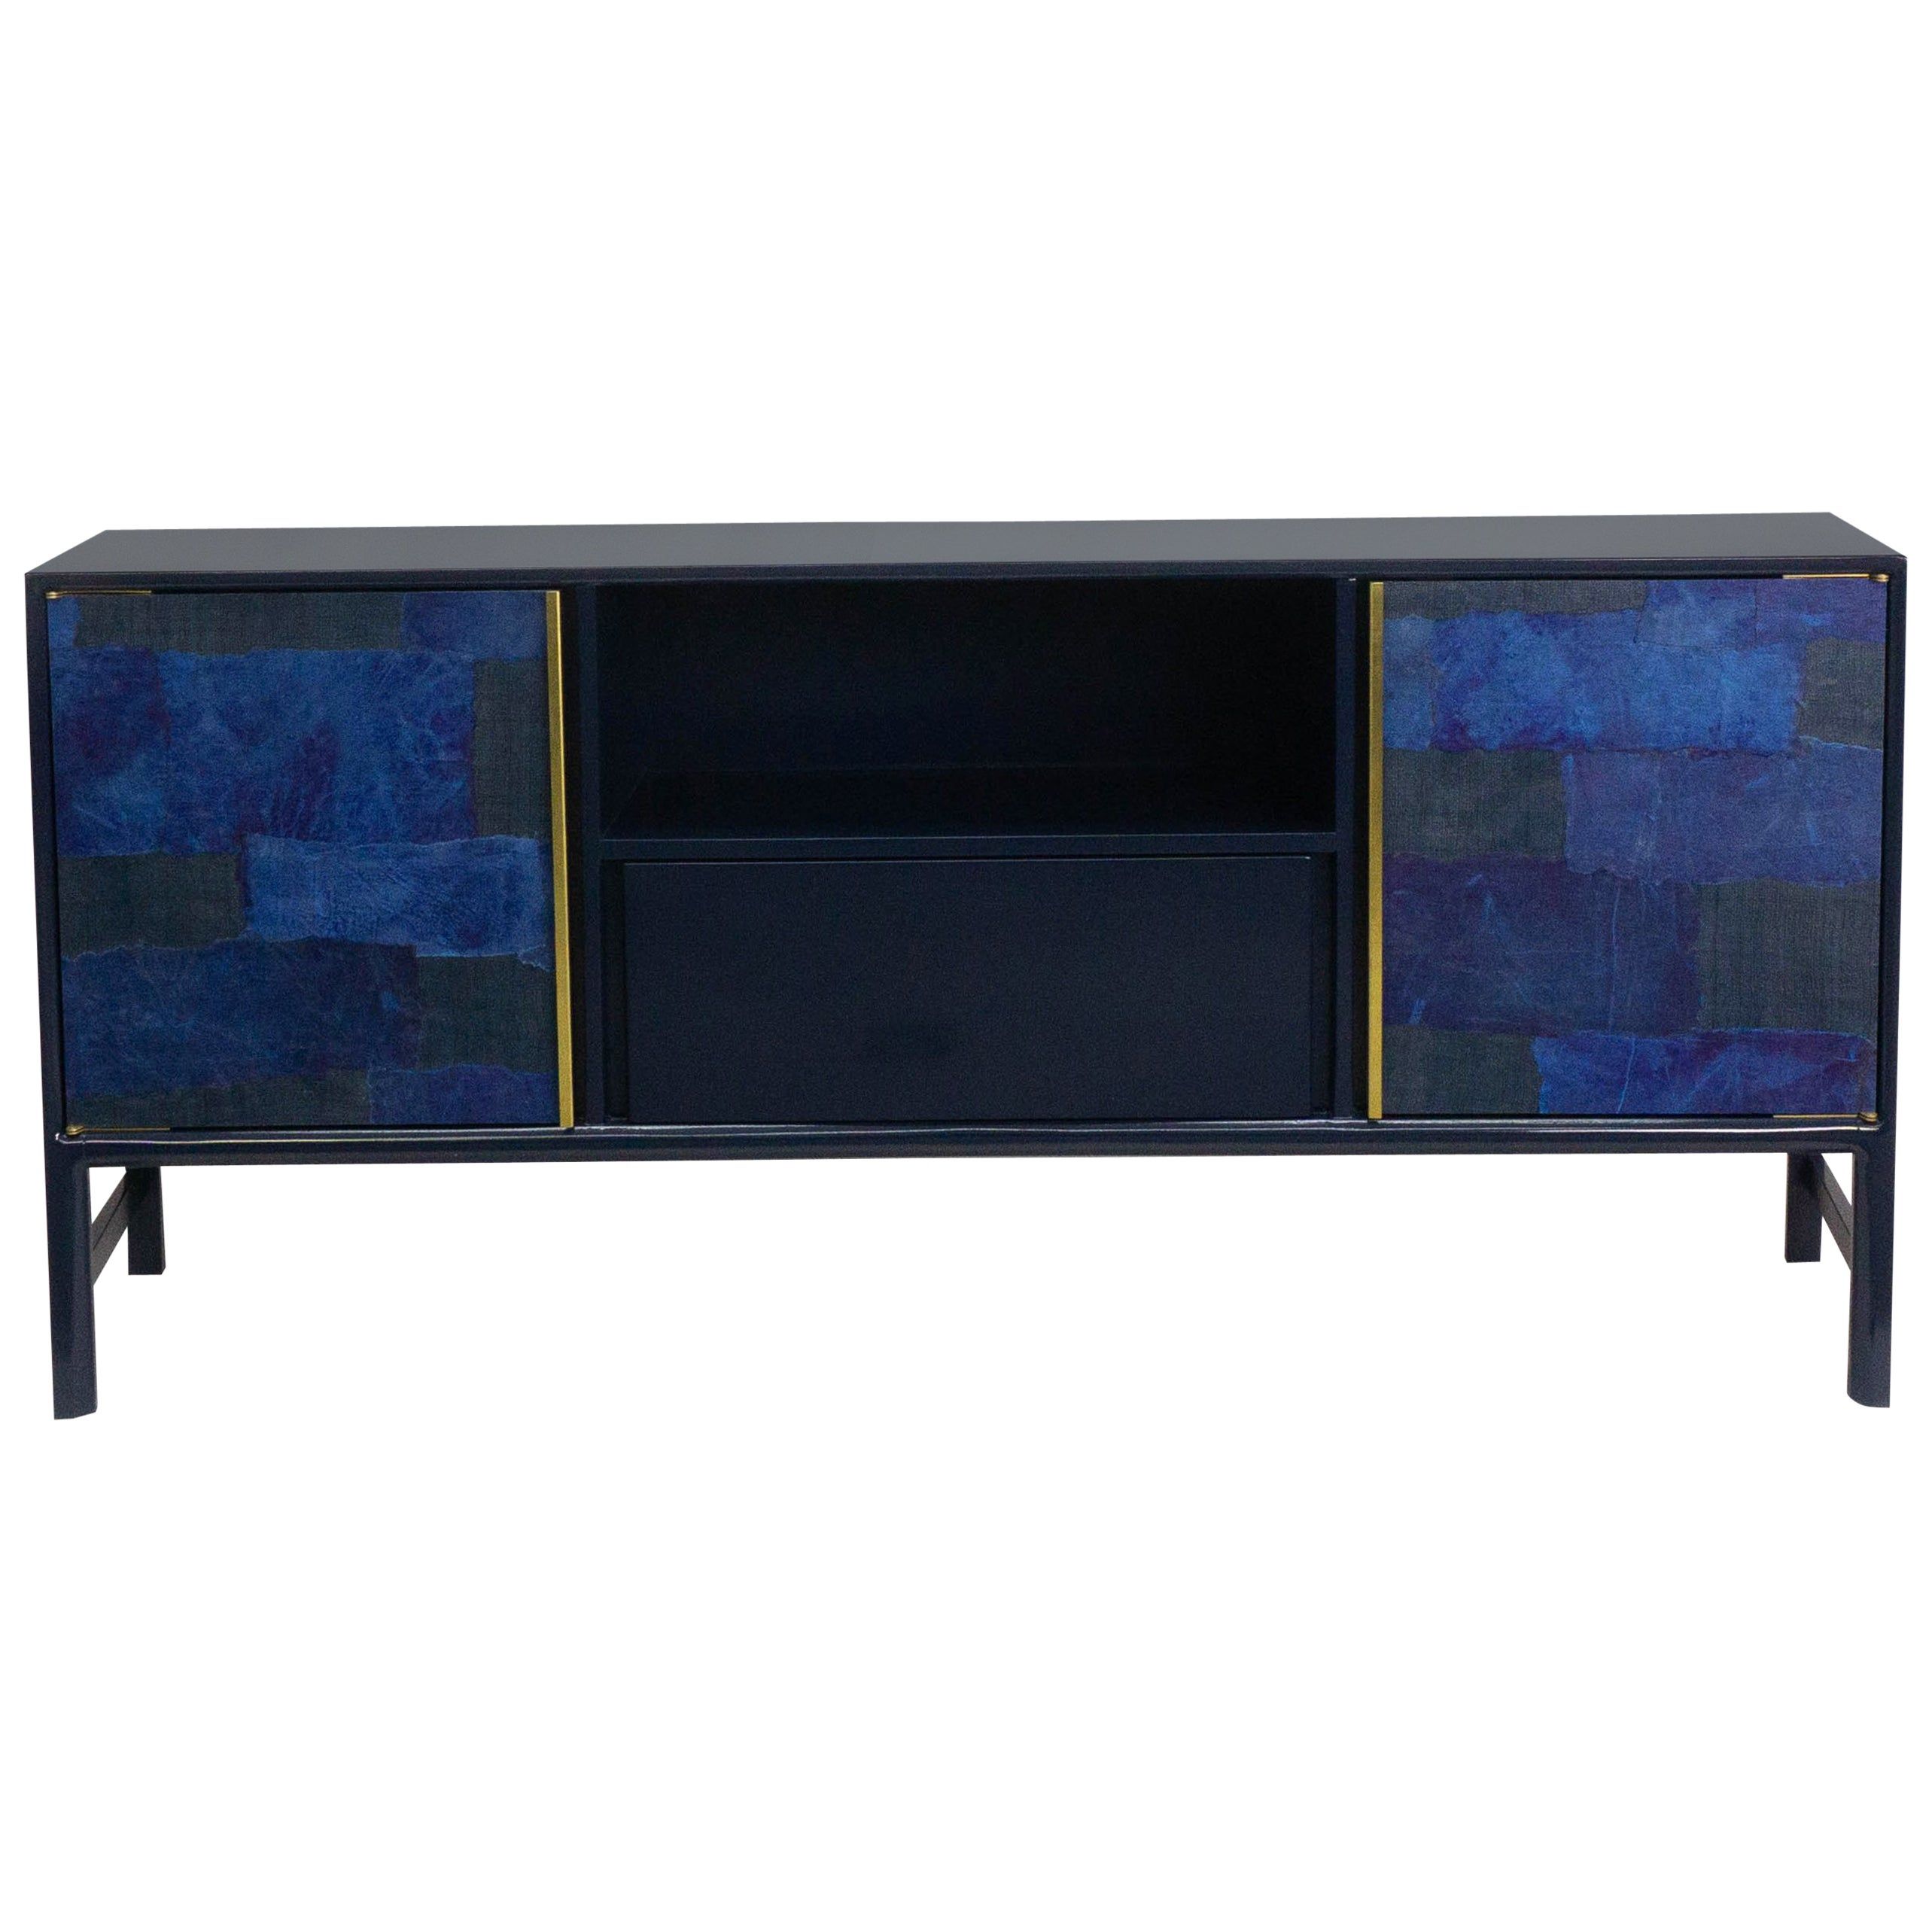 Sideboard Modern For Most Current Keiko Modern Bookmatch Sideboards (View 16 of 20)